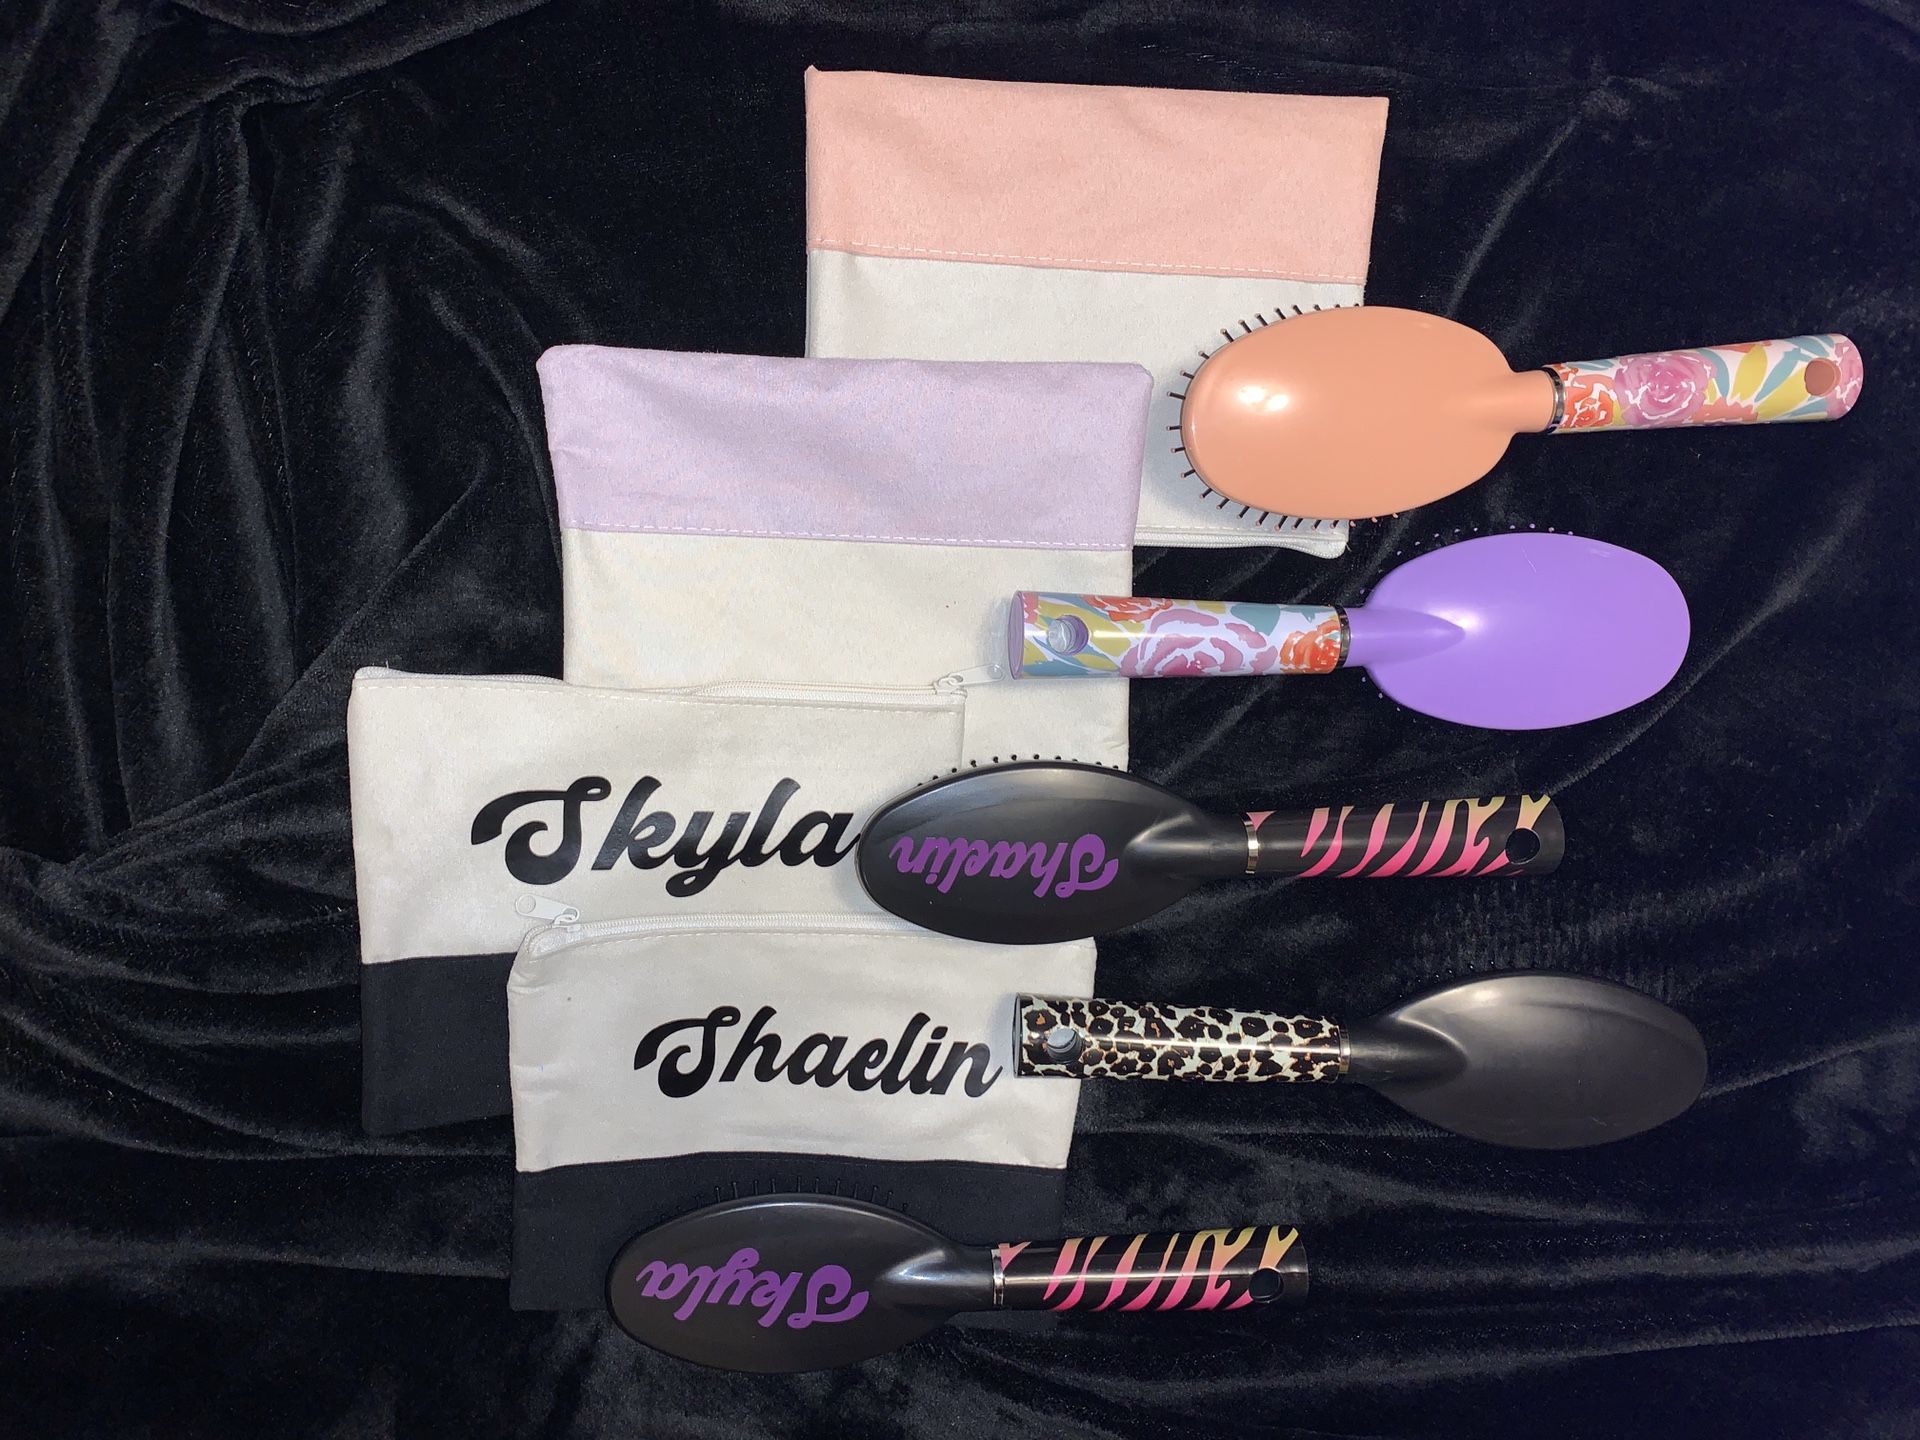 Makeup bags and matching brushes